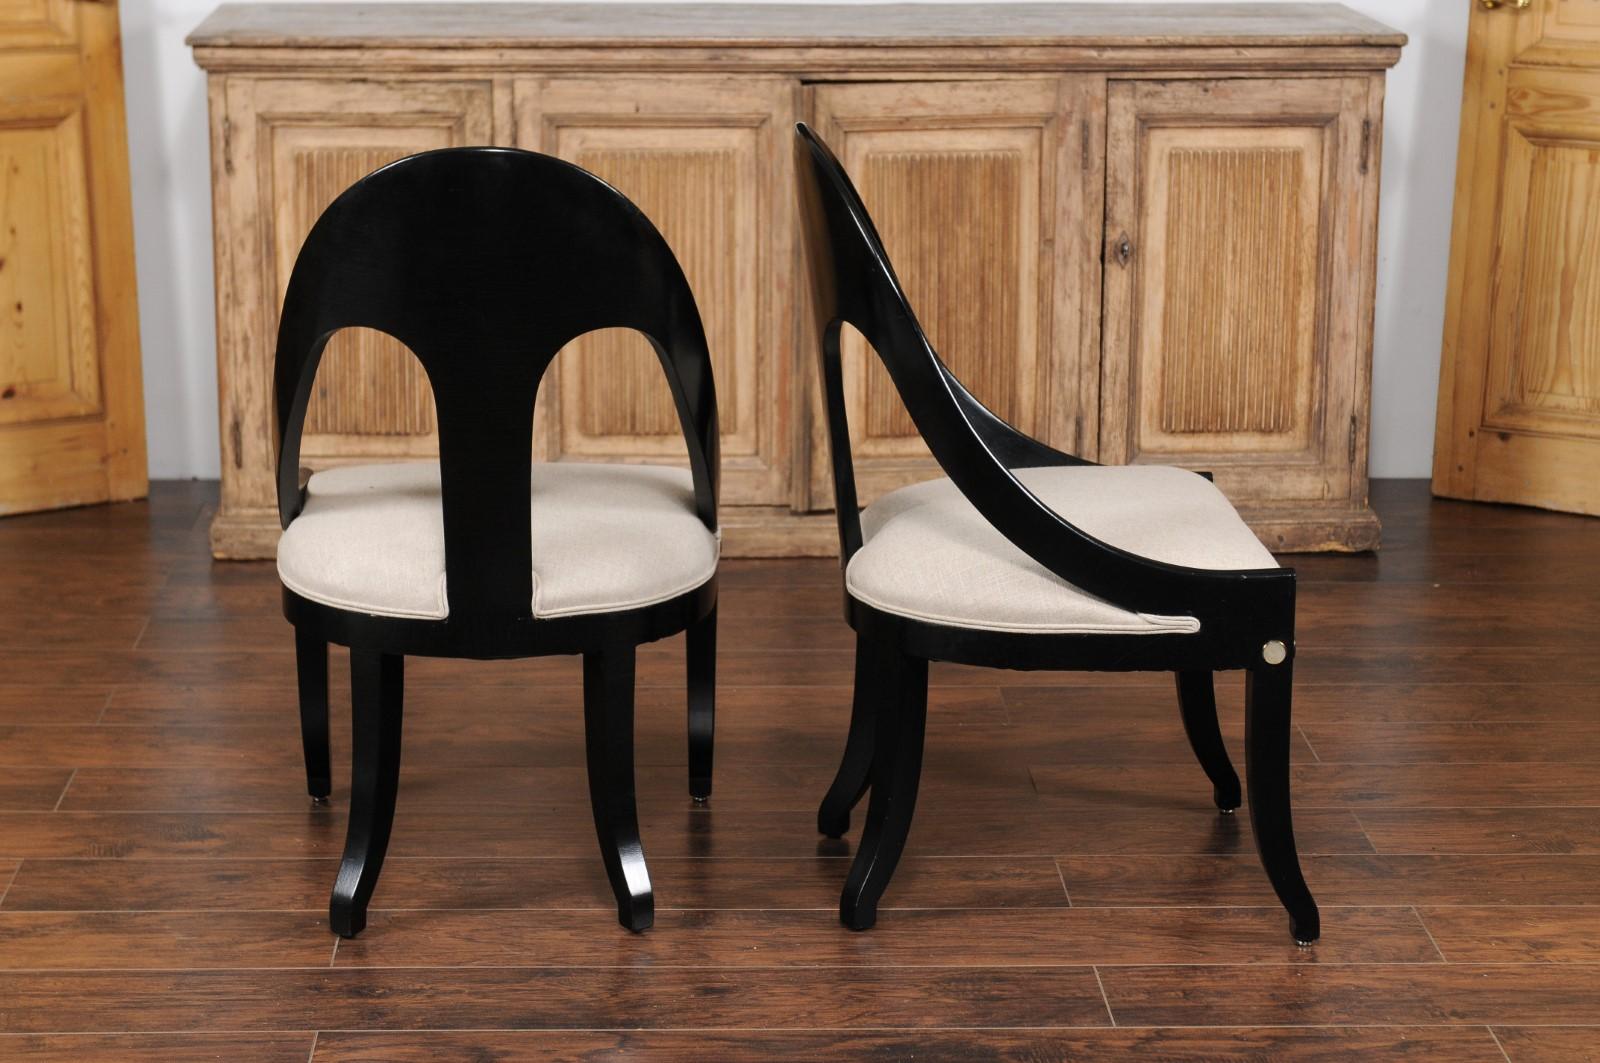 20th Century Pair of Vintage 1950s Ebonized Wood Spoon Back Chairs with Mother-of-pearl Inlay